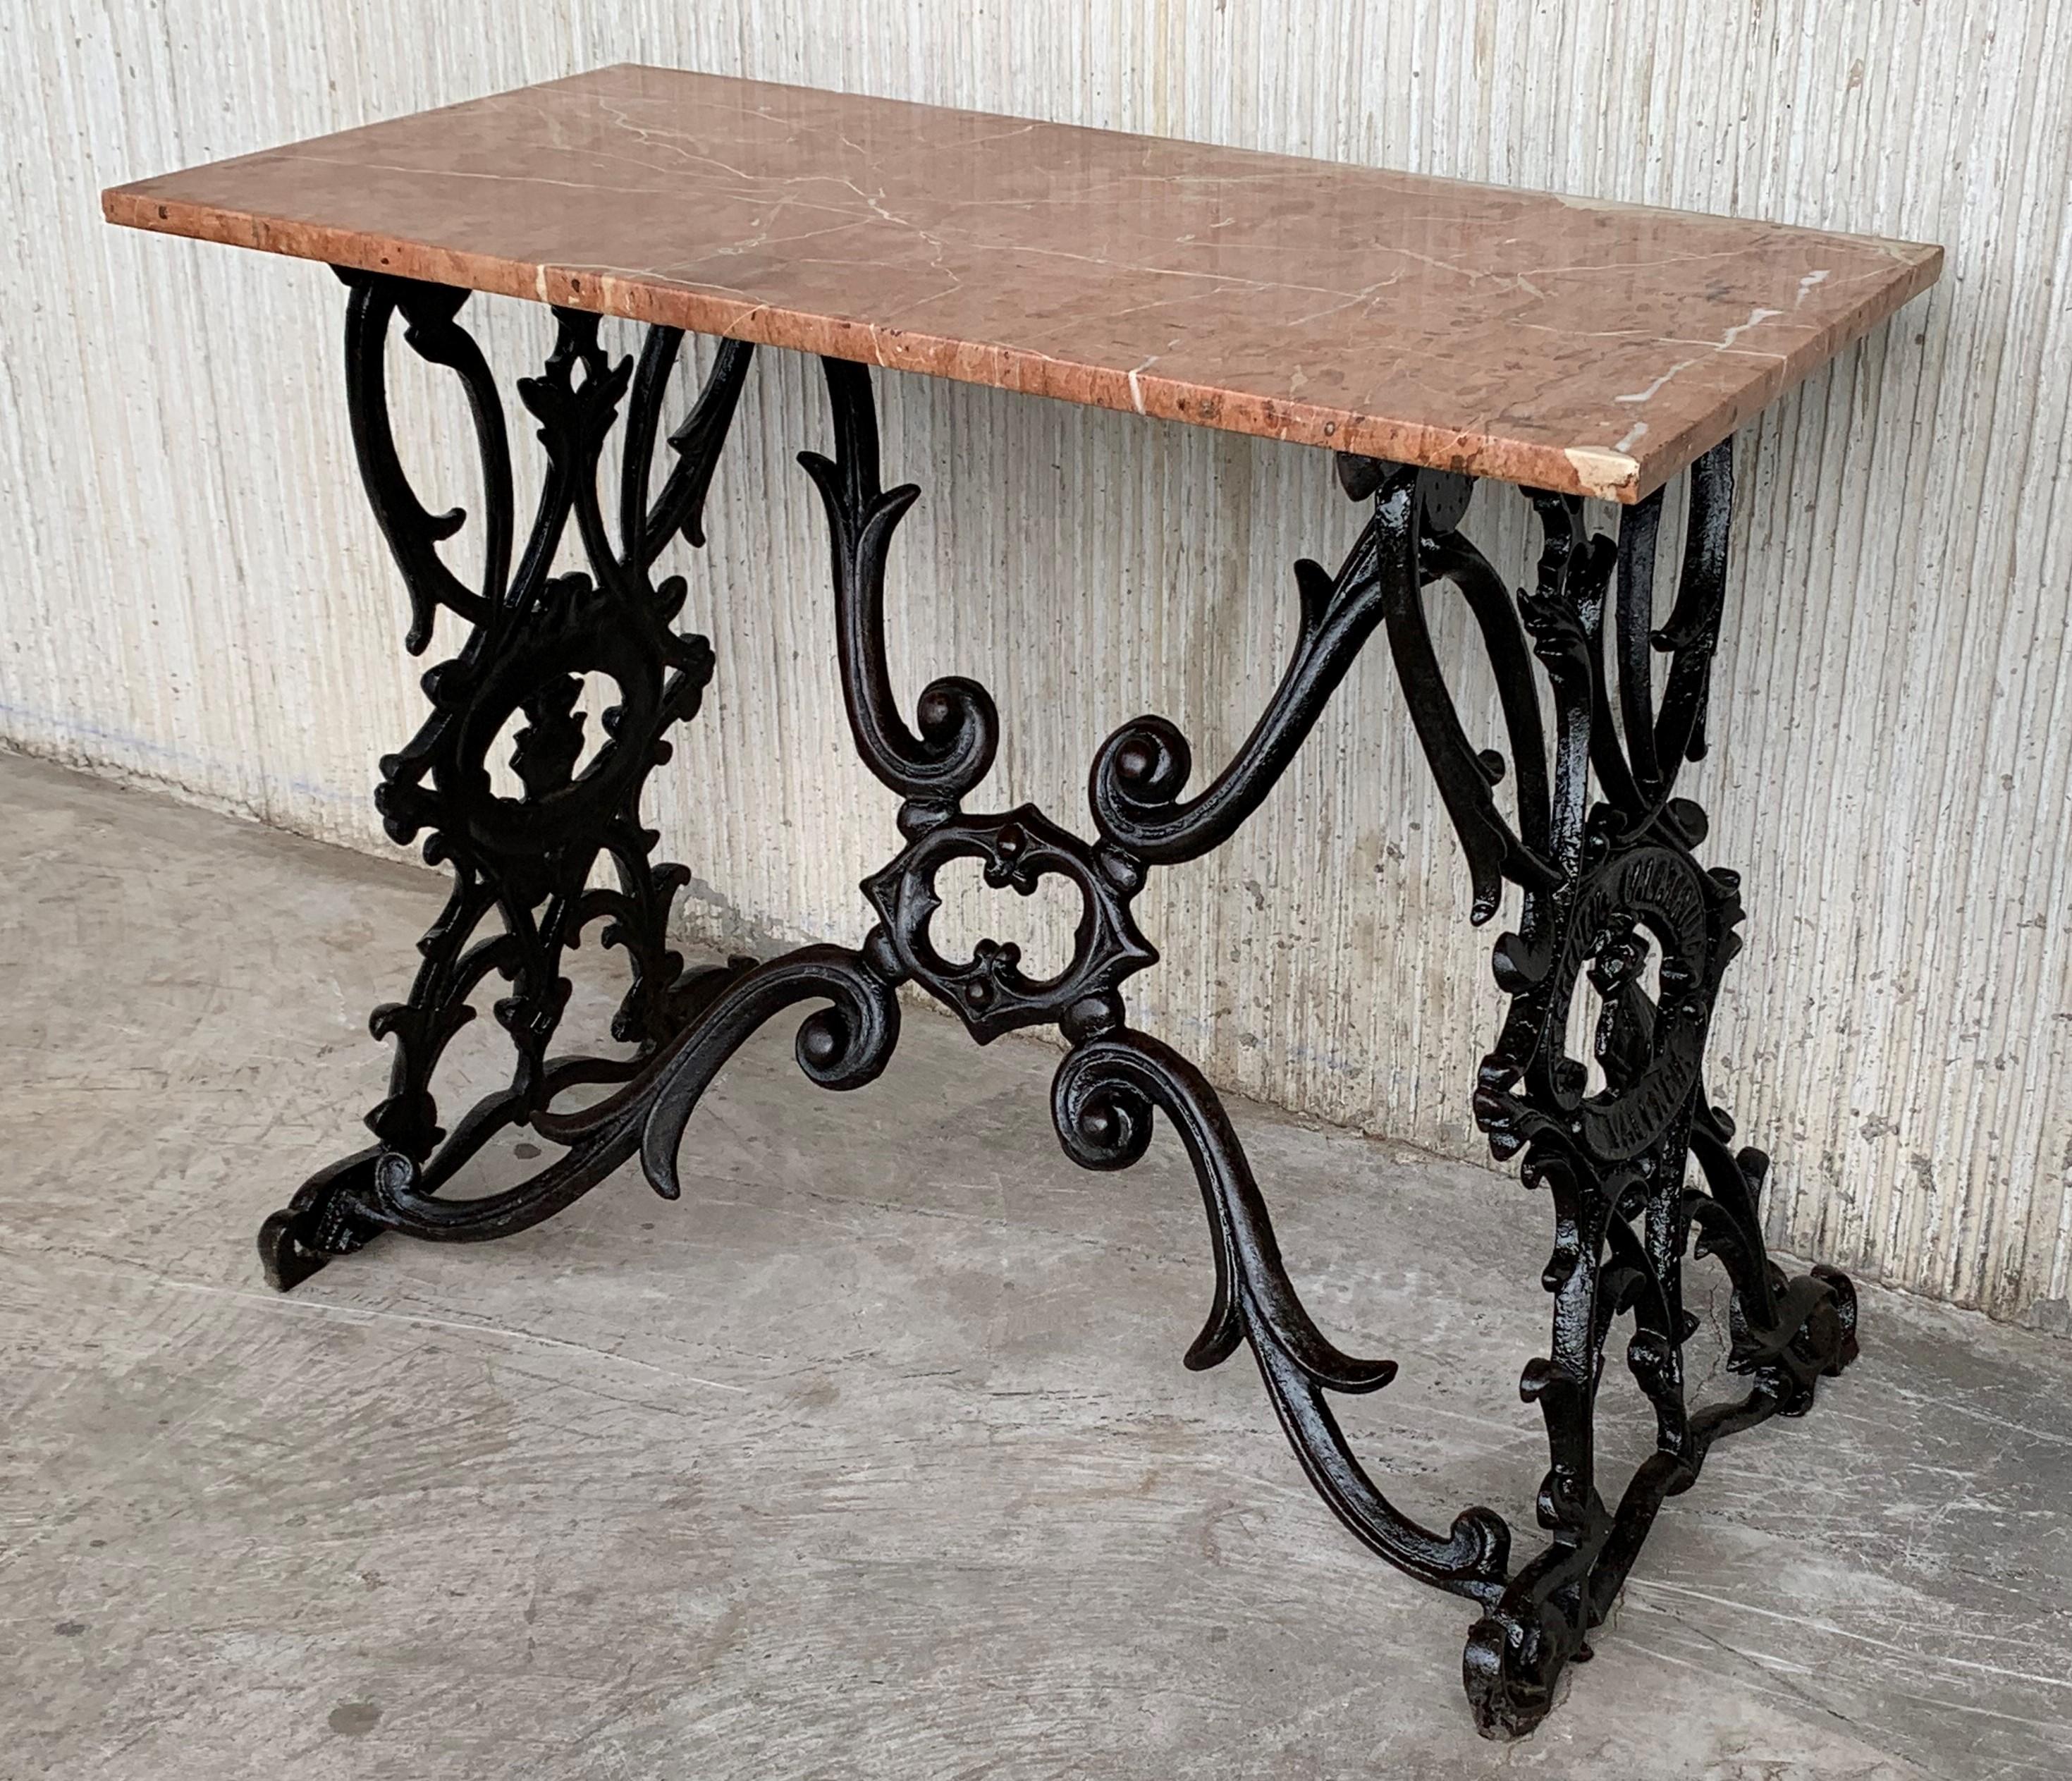 Beautiful antique 19th century Spanish cast iron bistro or garden table with pink marble.
Signed by Crescencio Calatayud, Valencia, Spain.